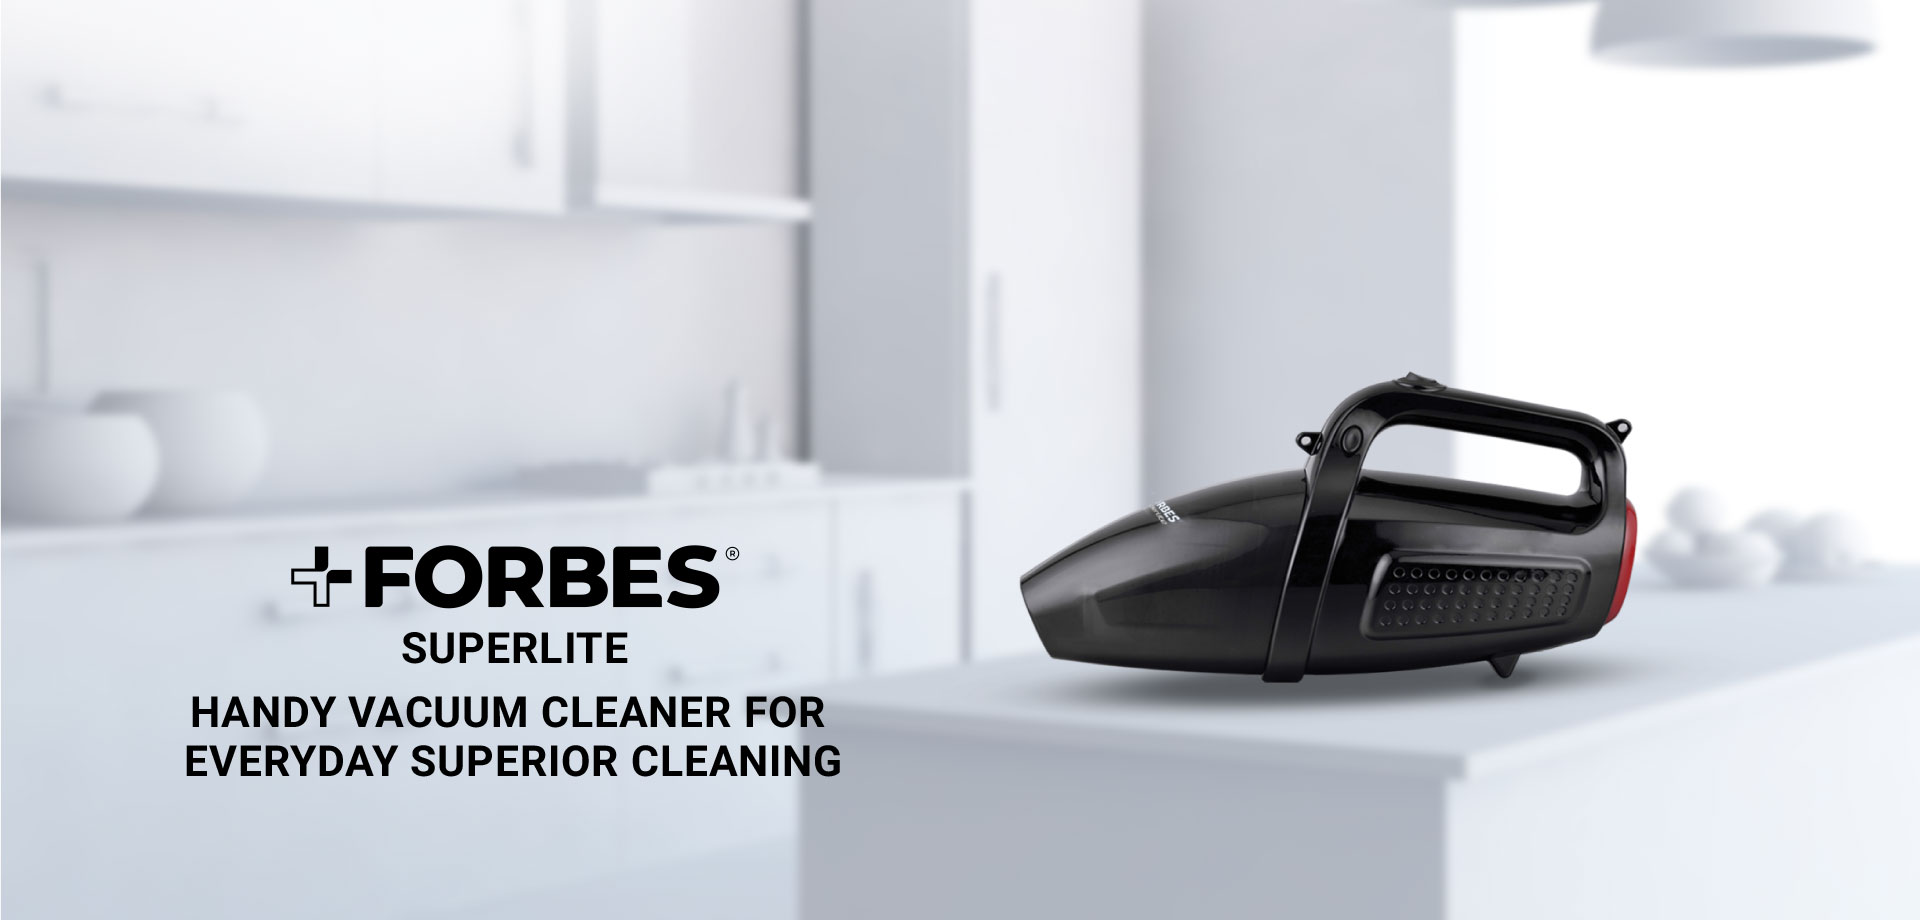 FORBES SUPERLITE HANDY VACUUM CLEANER FOR EVERYDAY SUPERIOR CLEANING